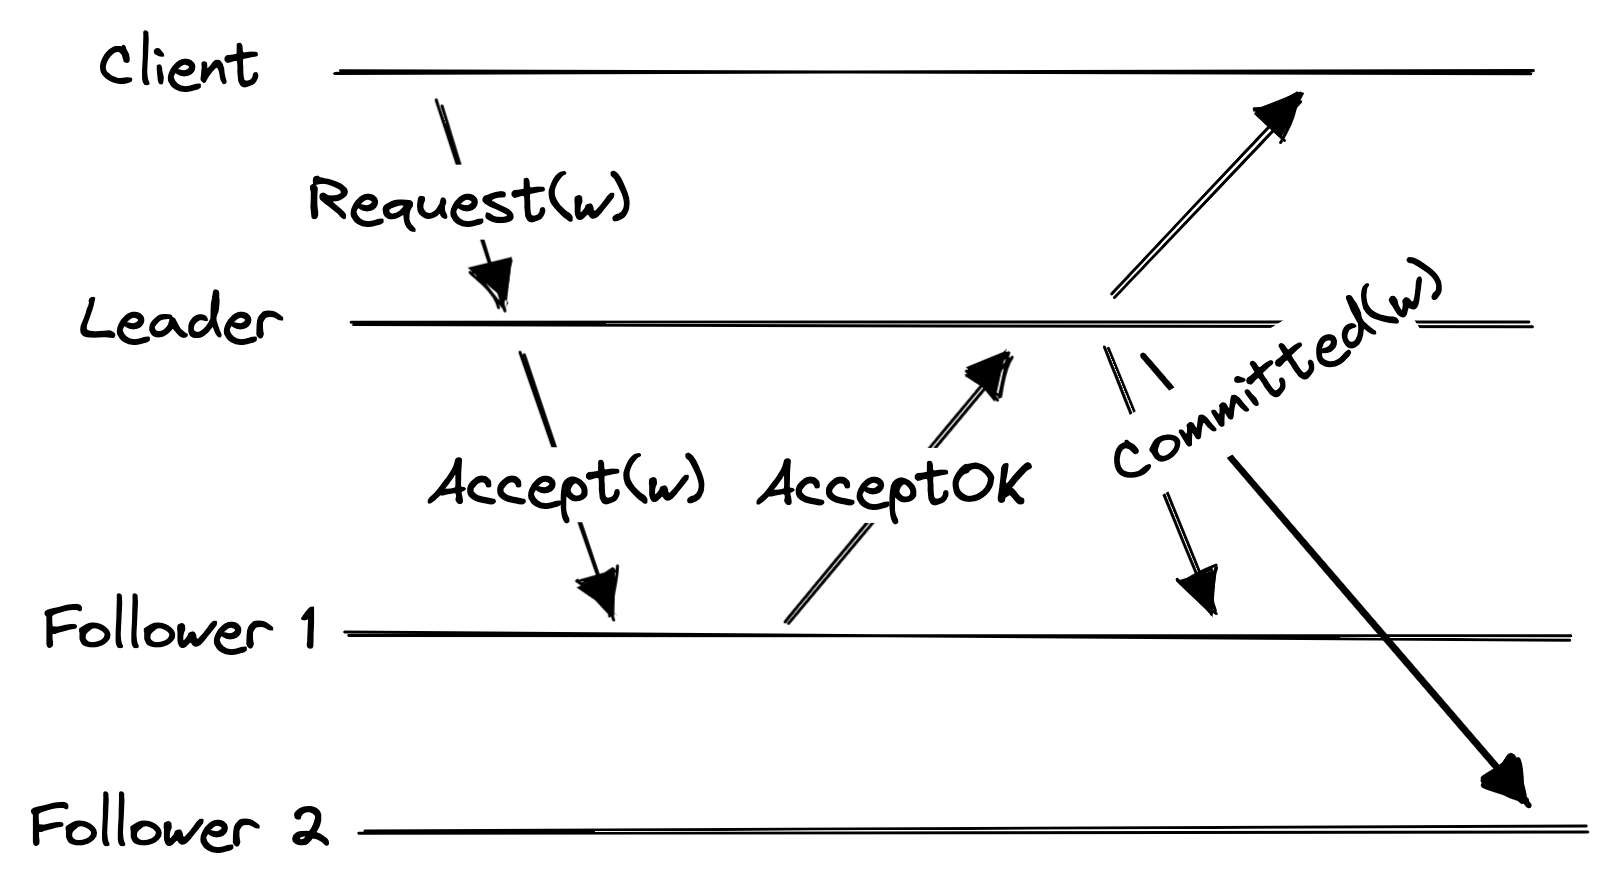 My sketch of the interaction between the client, the leader, and two followers. An arrow from the client, labeled “Request W”, goes from the client to the leader. Then an arrow labeled “Accept W” goes from the leader to Follower One. Then an arrow labeled “Accept OK” goes from Follower One to the leader. Then three arrows labeled “Committed W” go from the leader to both followers and the client.